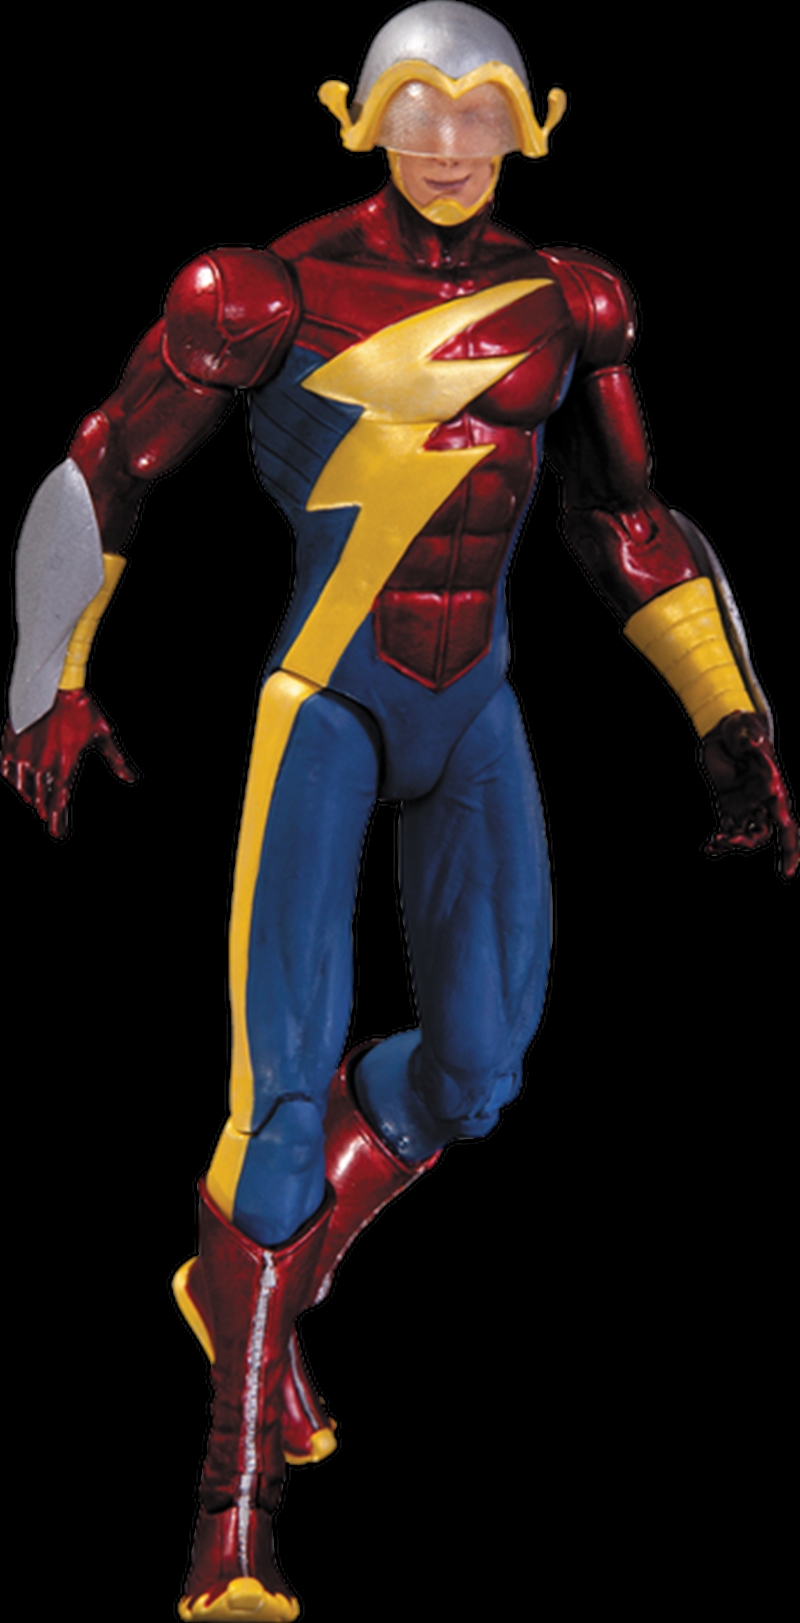 DC Comics - Earth 2 The Flash (Jay Garrick) Action Figure/Product Detail/Figurines